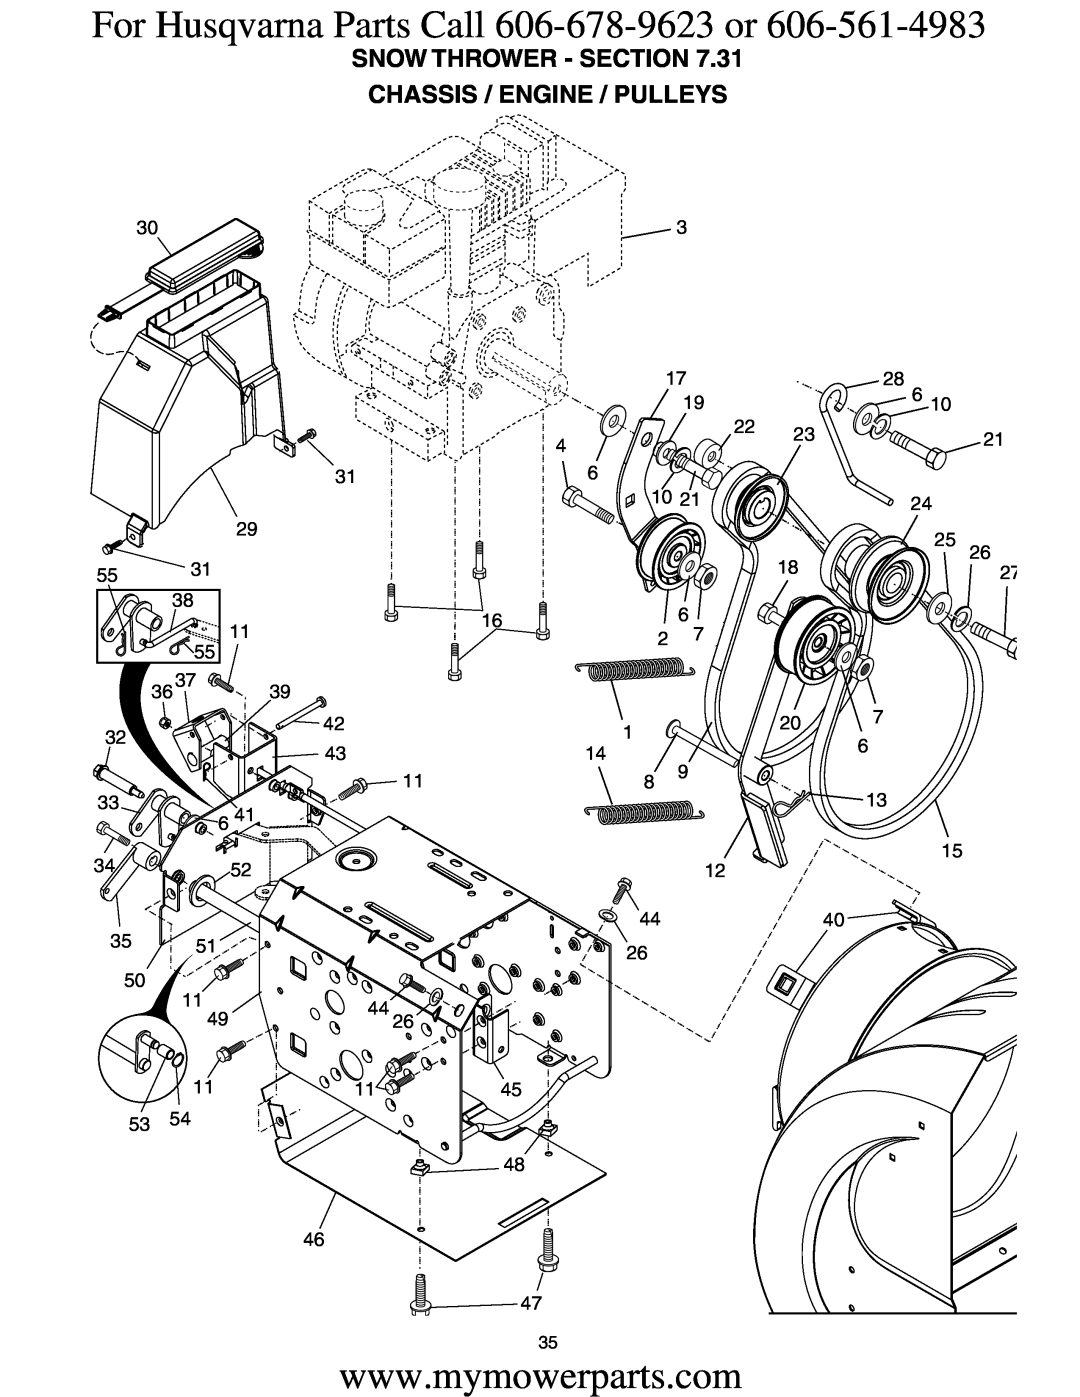 Electrolux OHV service manual For Husqvarna Parts Call 606-678-9623 or, Snow Thrower - Section Chassis / Engine / Pulleys 